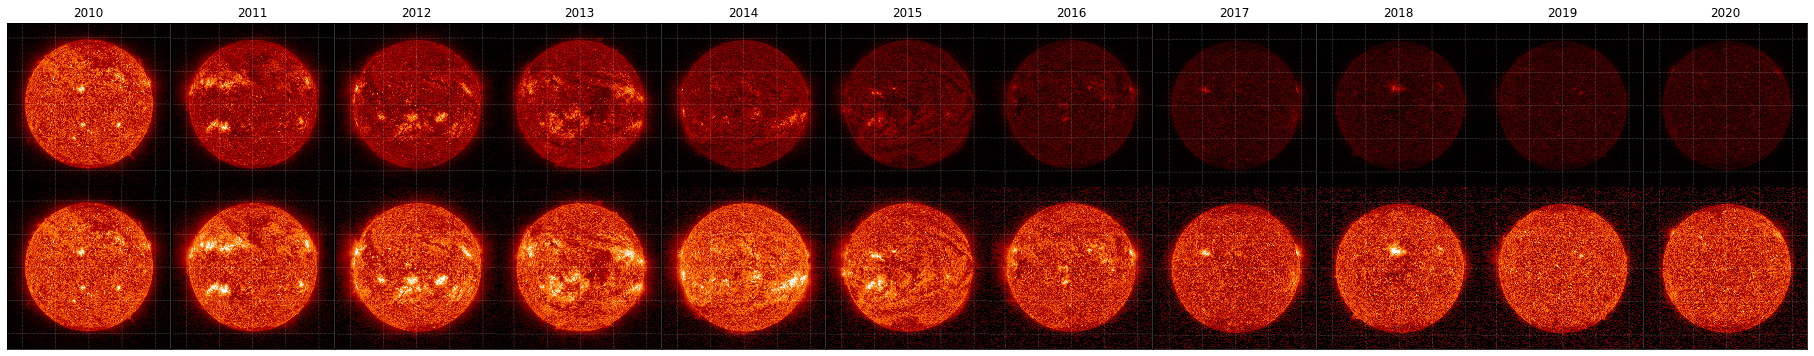 Two lines of images of the Sun. The top line gets darker and harder to see, while the bottom row stays a consistent brightly visible image. 